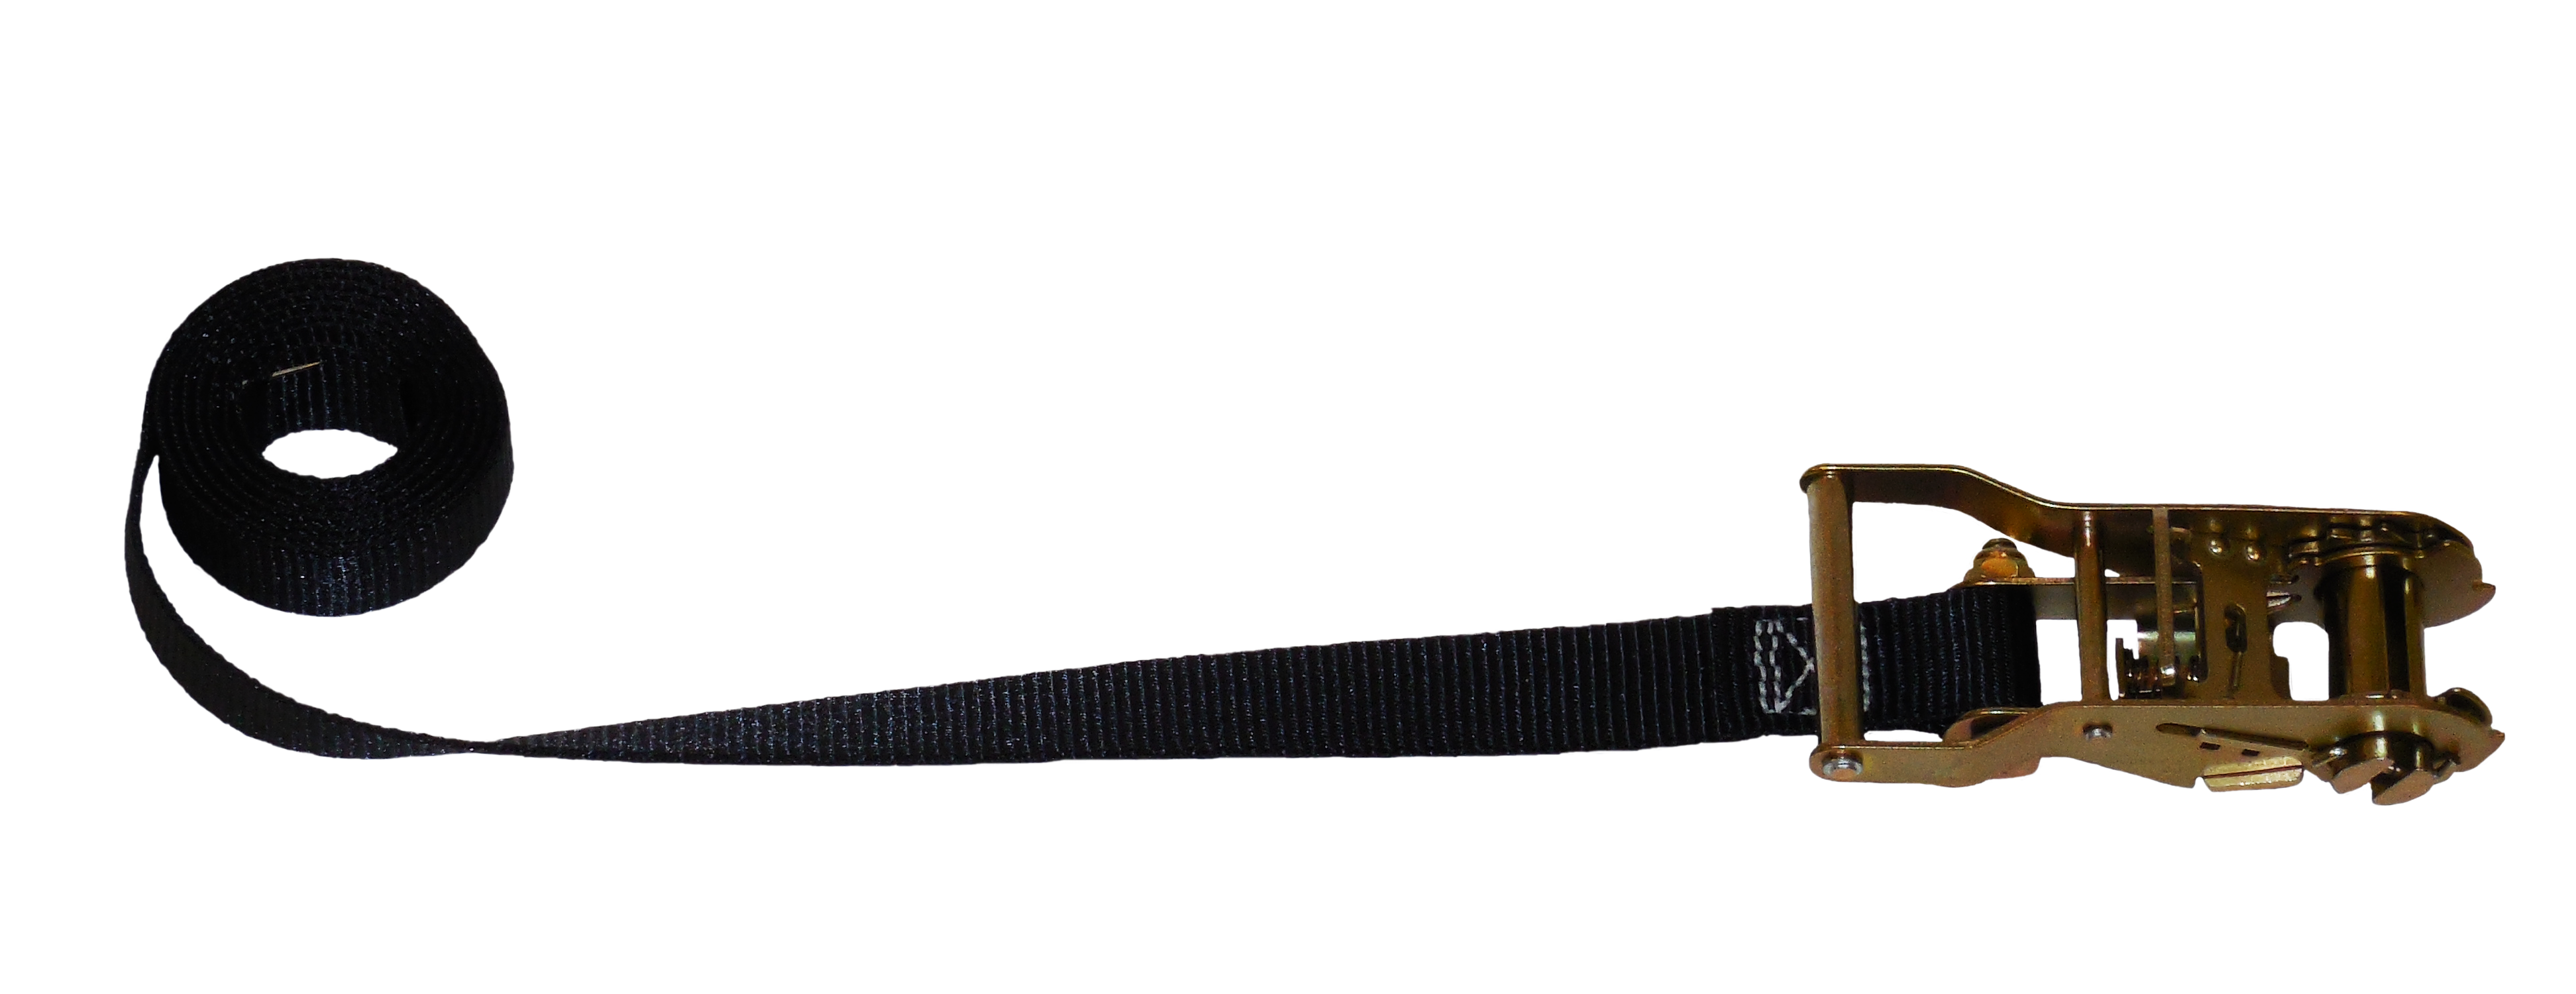 CTDUSA 1 Inch Replacement Strap For Ratchet or Cam Buckle.Pic Color and Length. 